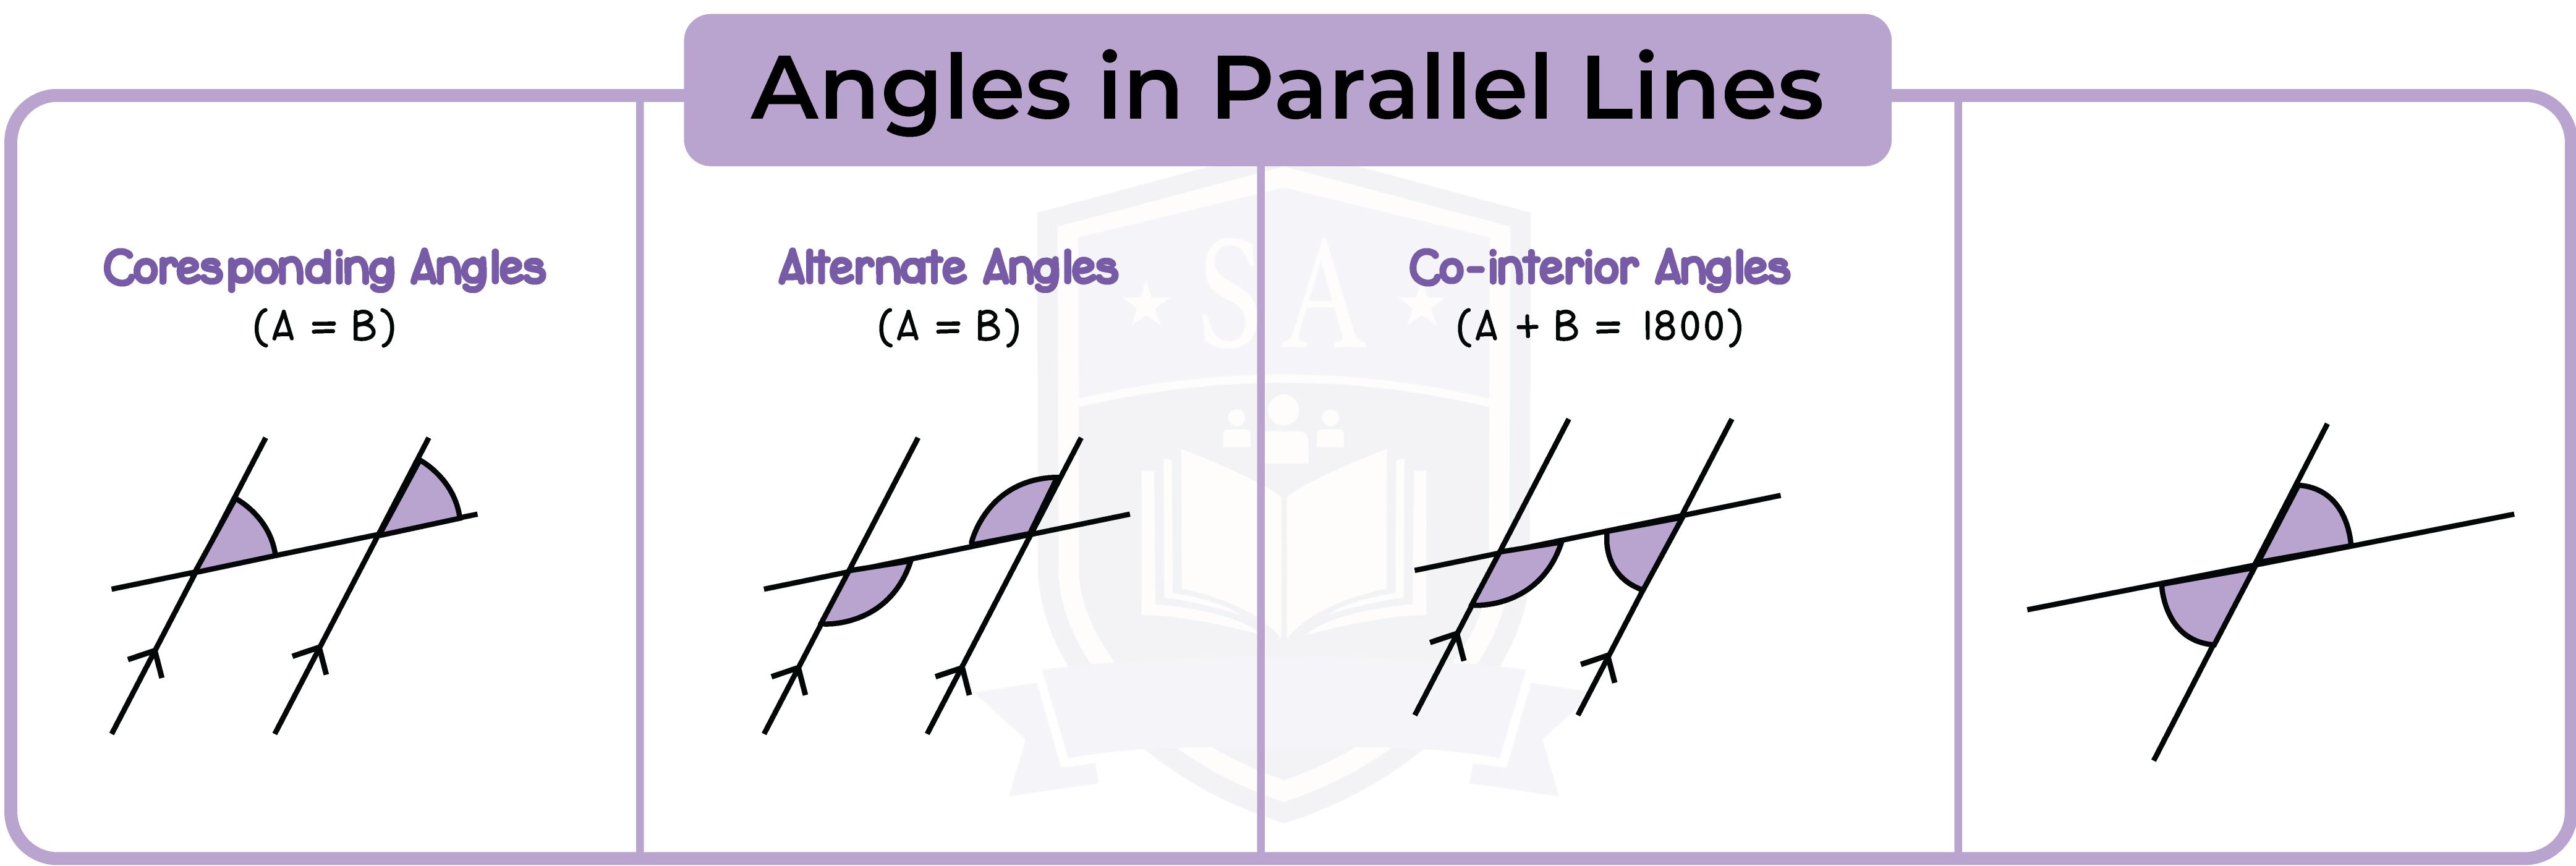 edexcel_igcse_mathematics a_topic 25_angles, lines and triangles_002_Angles in Parallel Lines